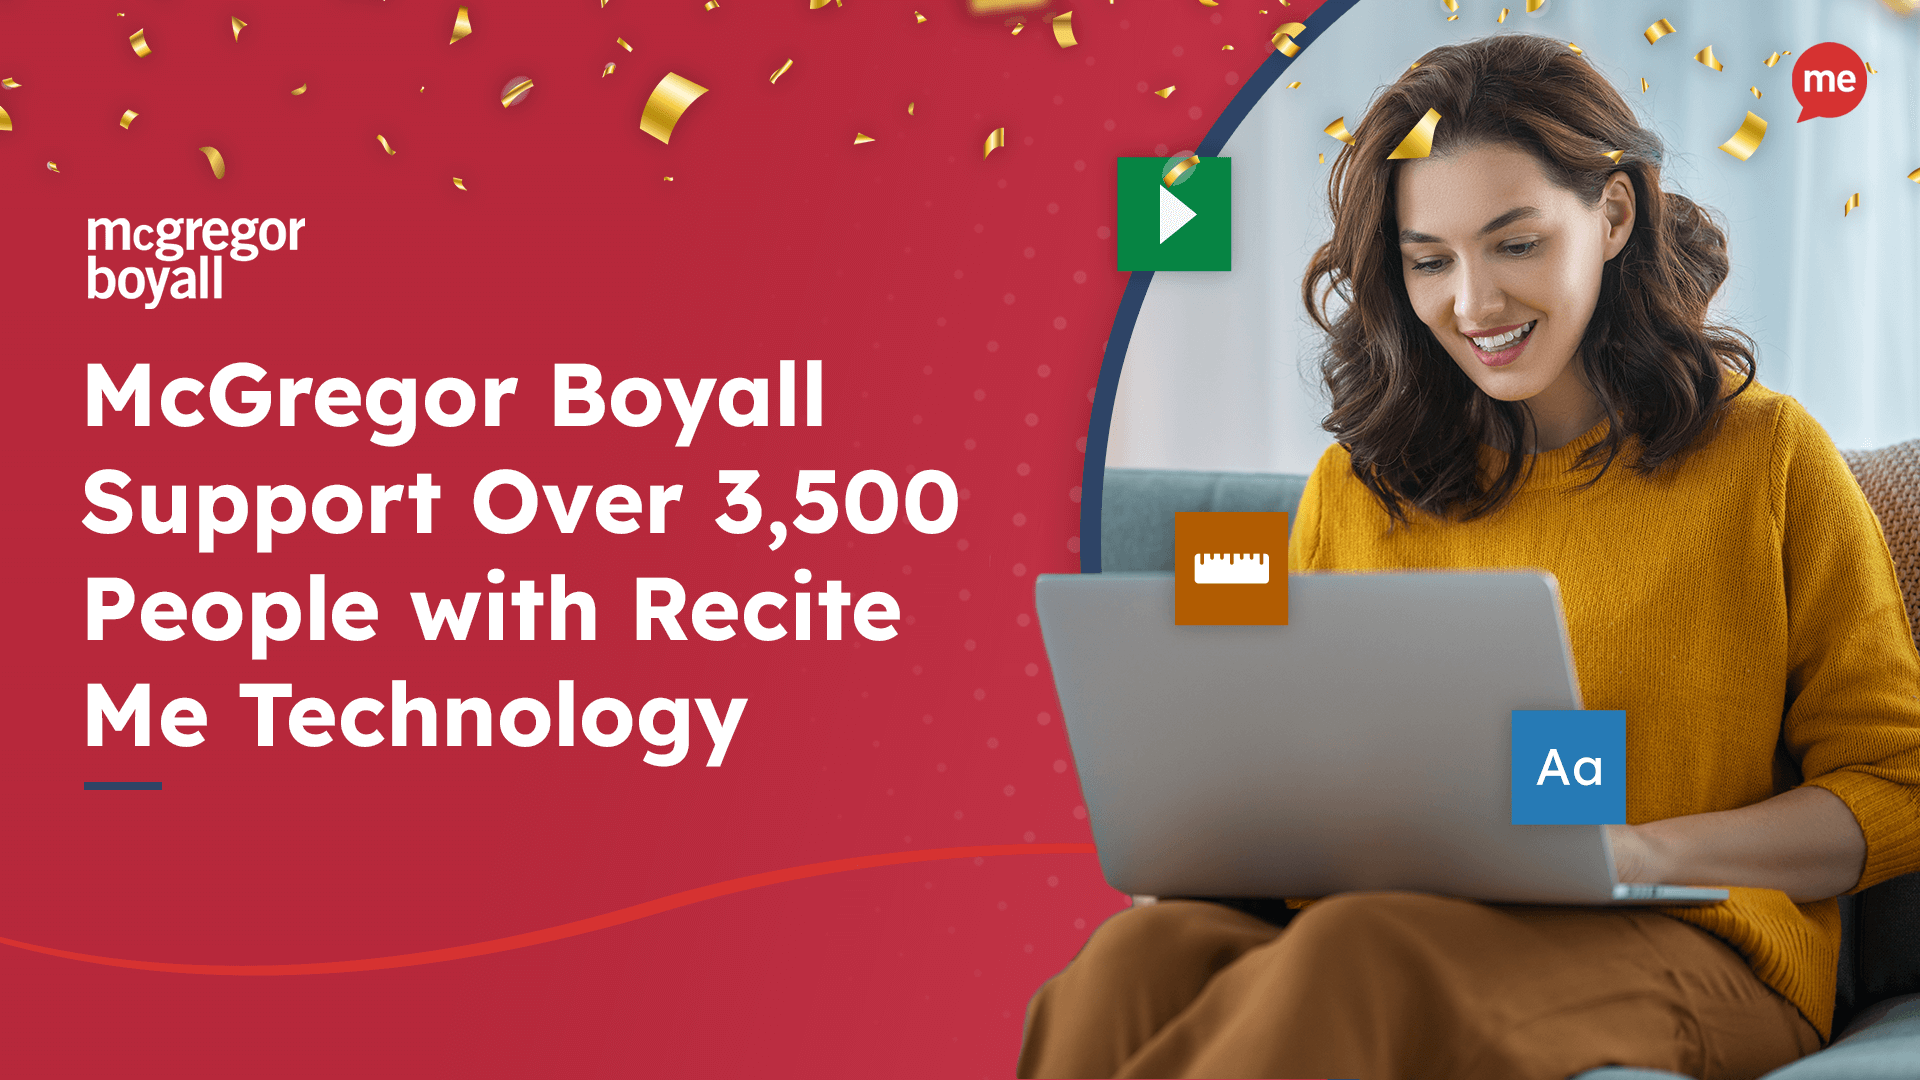 McGregor Boyall Support Over 3,500 People with Recite Me Technology